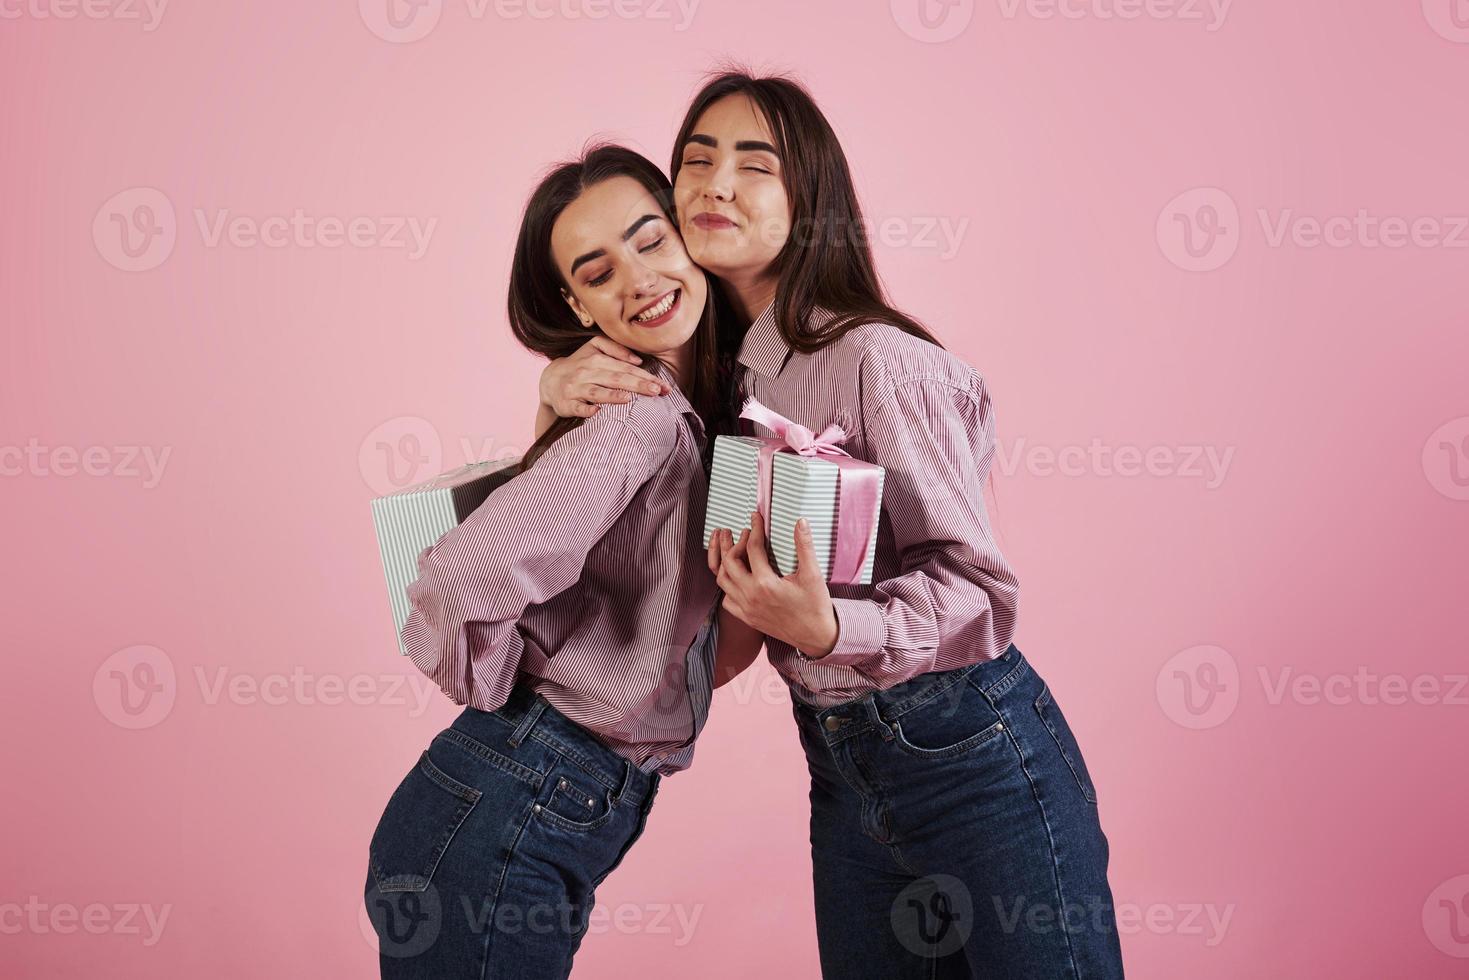 Celebrating together. Young women having fun in the studio with pink background. Adorable twins photo